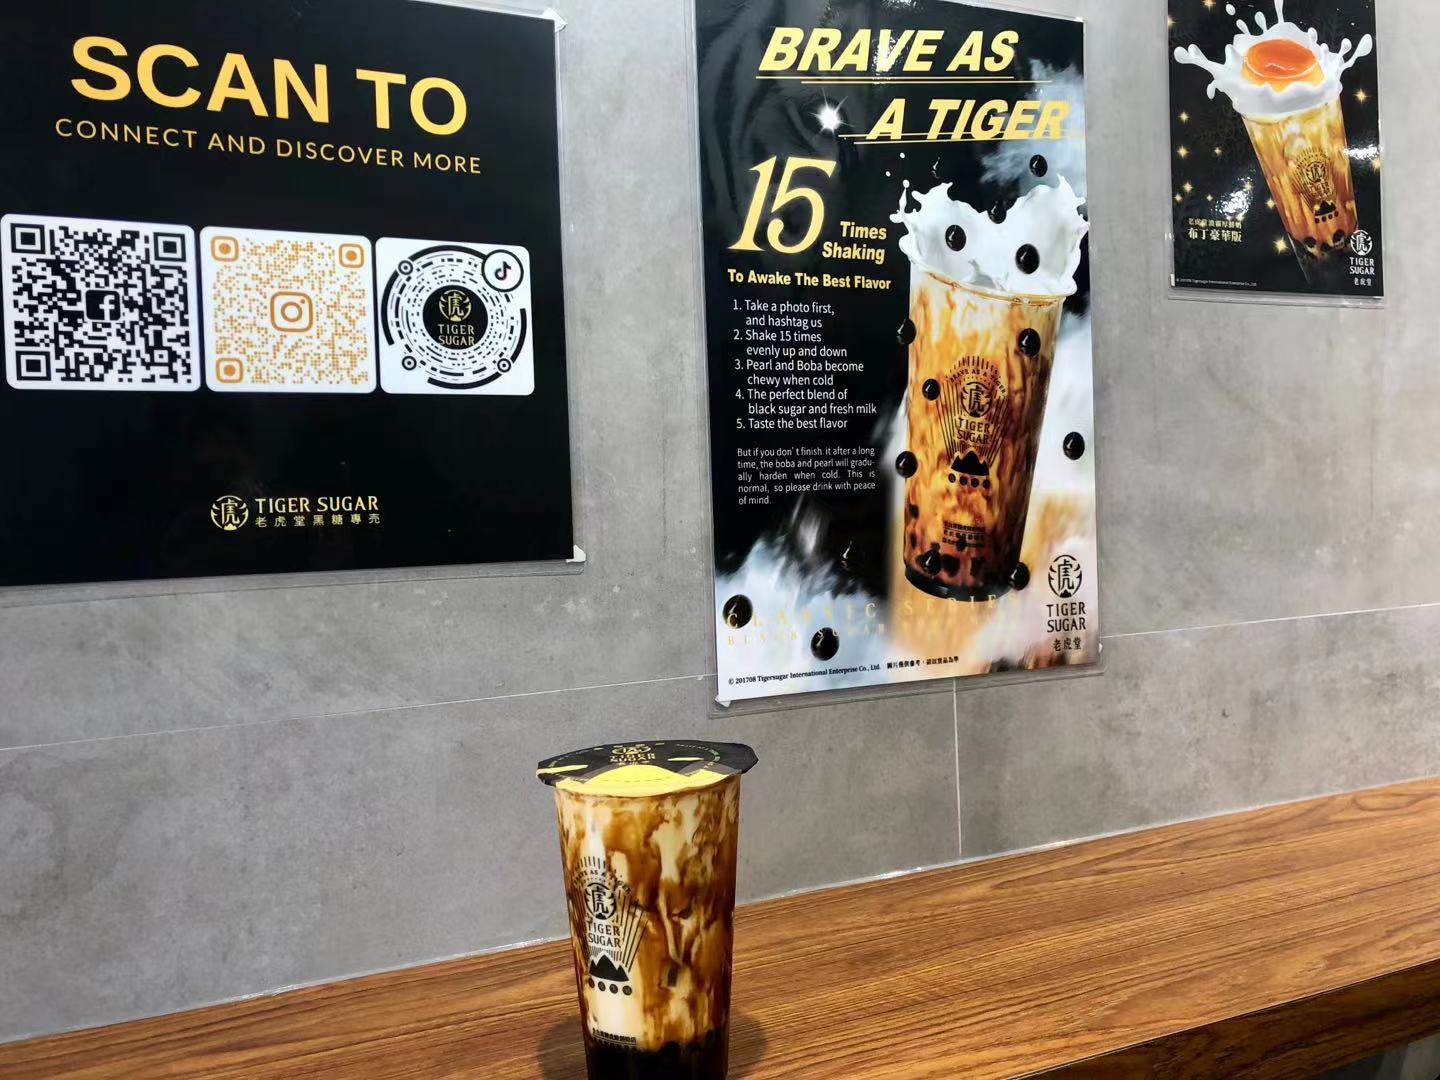 Inside Tiger Sugar, there is a boba drink on a wooden counter. Behind it, there are three boba posters on the gray wall. Photo by Xiaohui Zhang.